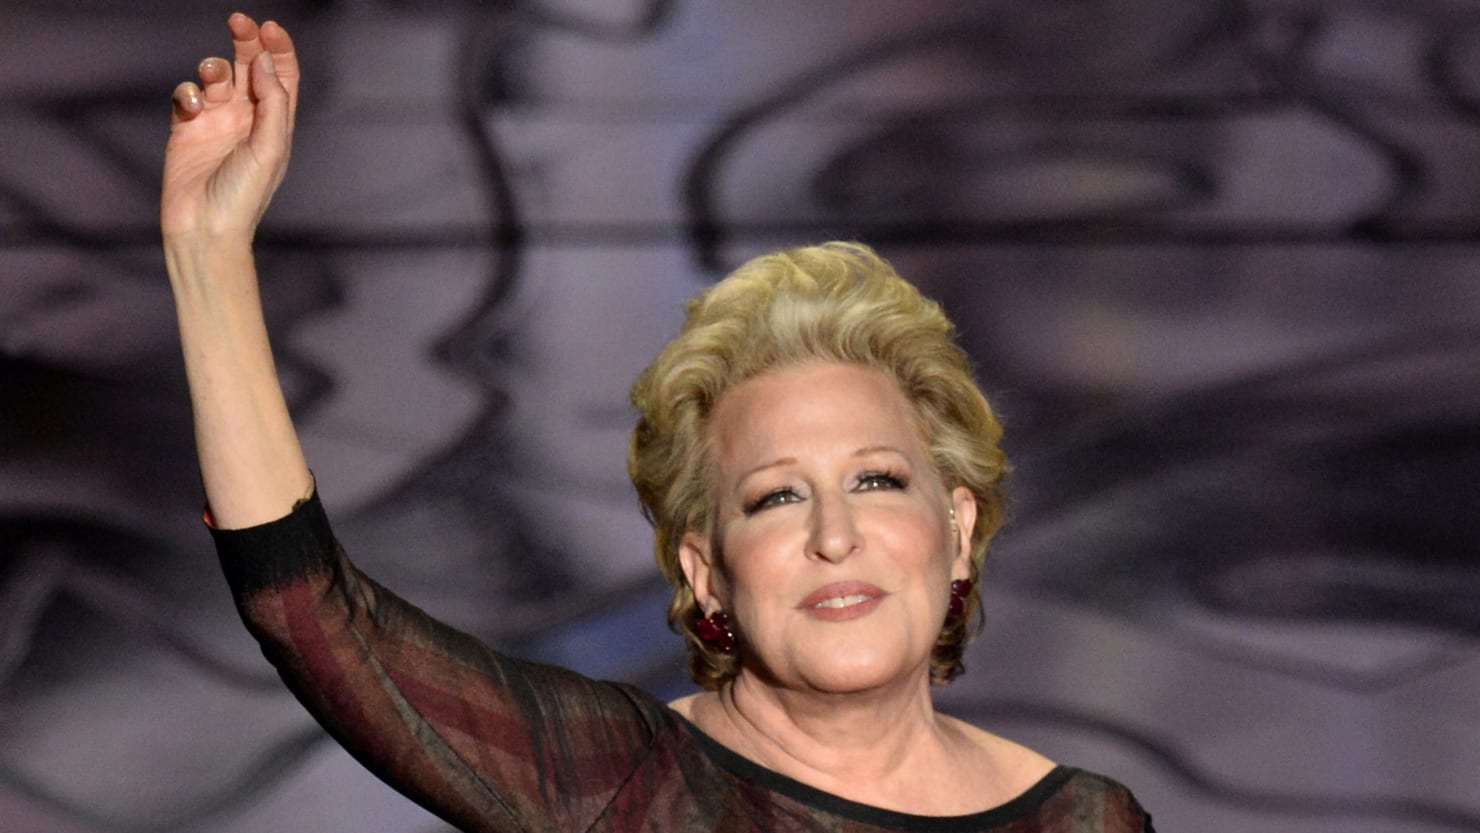 Bette Midler Geraldo Rivera ‘has Yet To Apologize For Groping Me